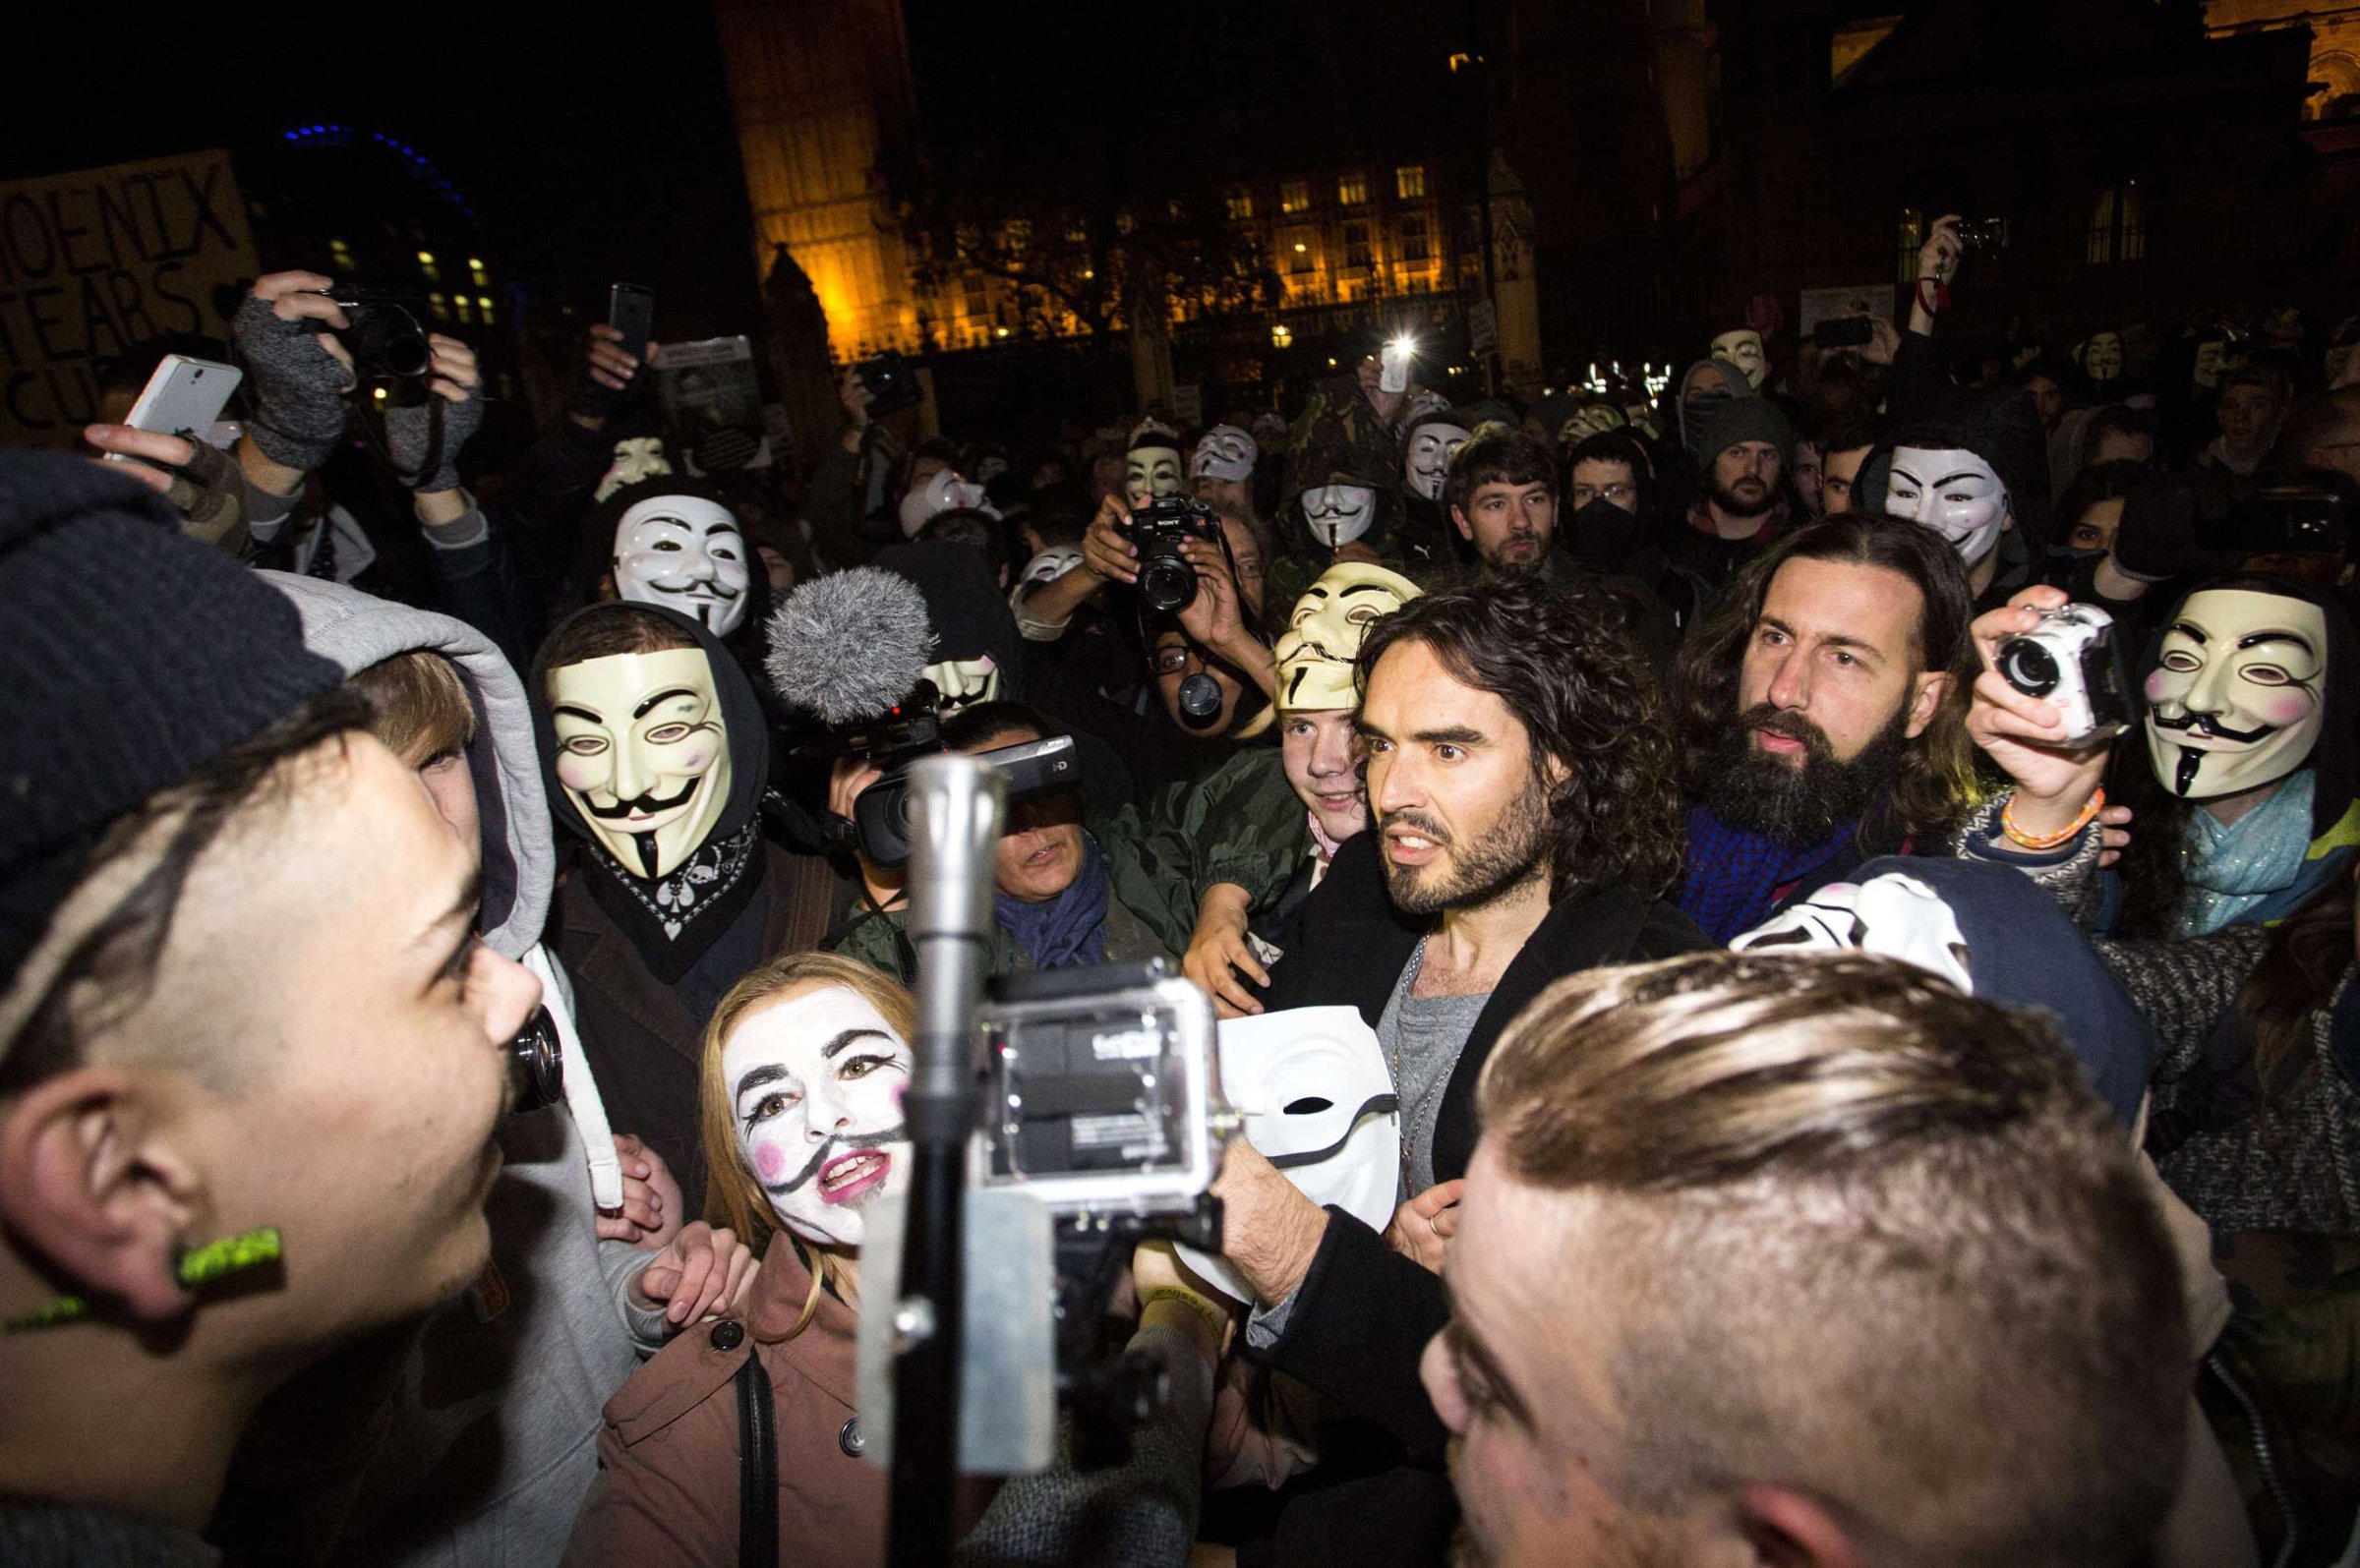 British comedian Russell Brand joins anti-capitalist protesters during the "Million Masks March" in London on Nov. 5, 2014.